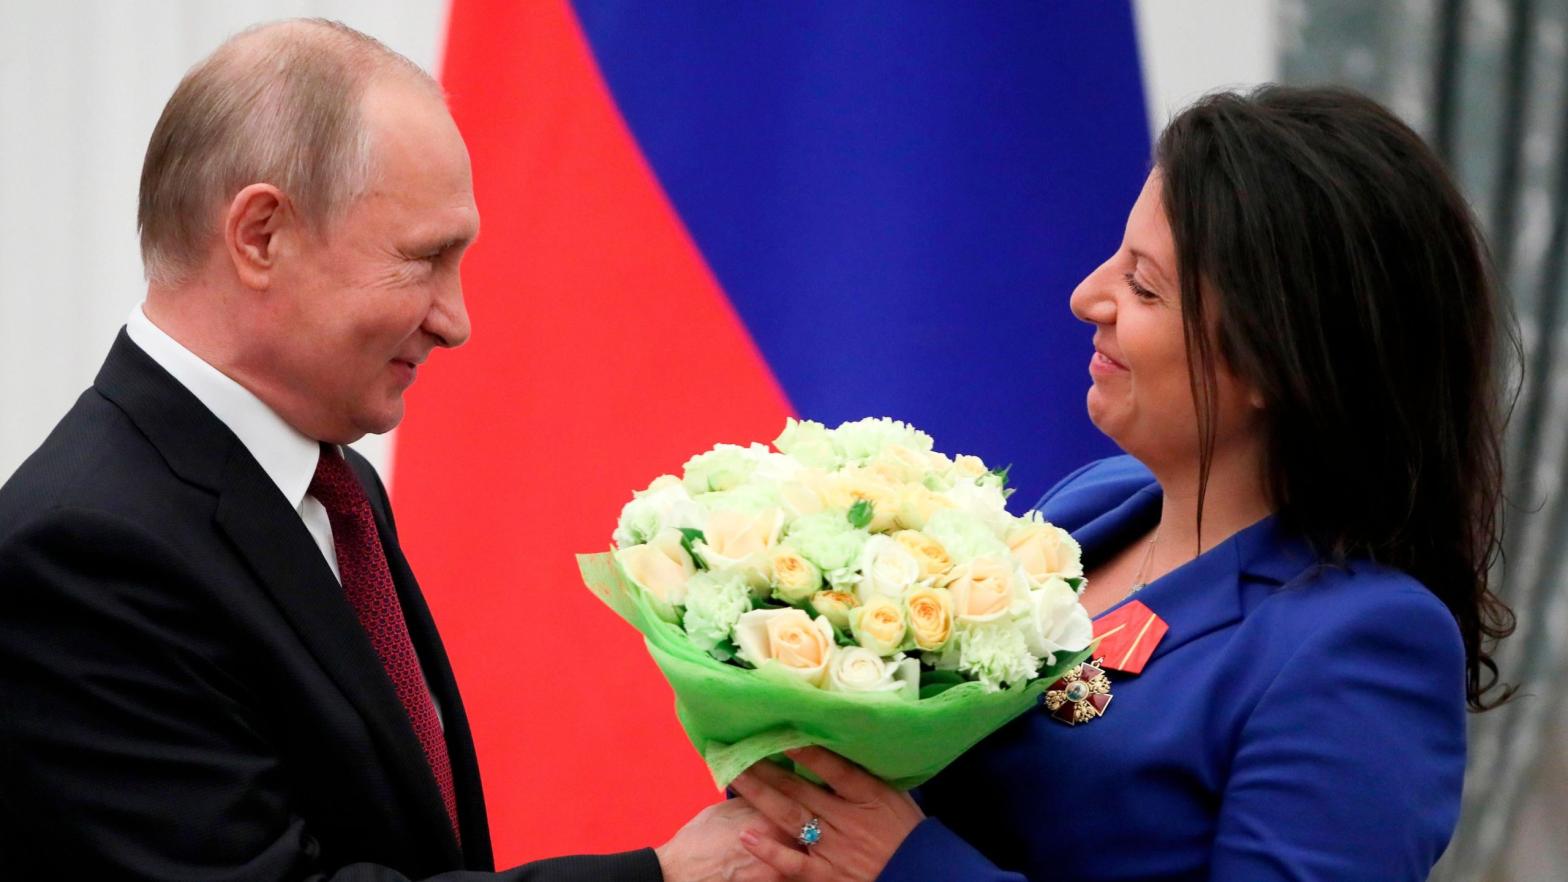 Russian President Vladimir Putin presents flowers to editor-in-chief of Russian state broadcaster RT, Margarita Simonyan, at the Kremlin in Moscow on May 23, 2019. (Photo: Evgenia Novozhenina/AFP, Getty Images)